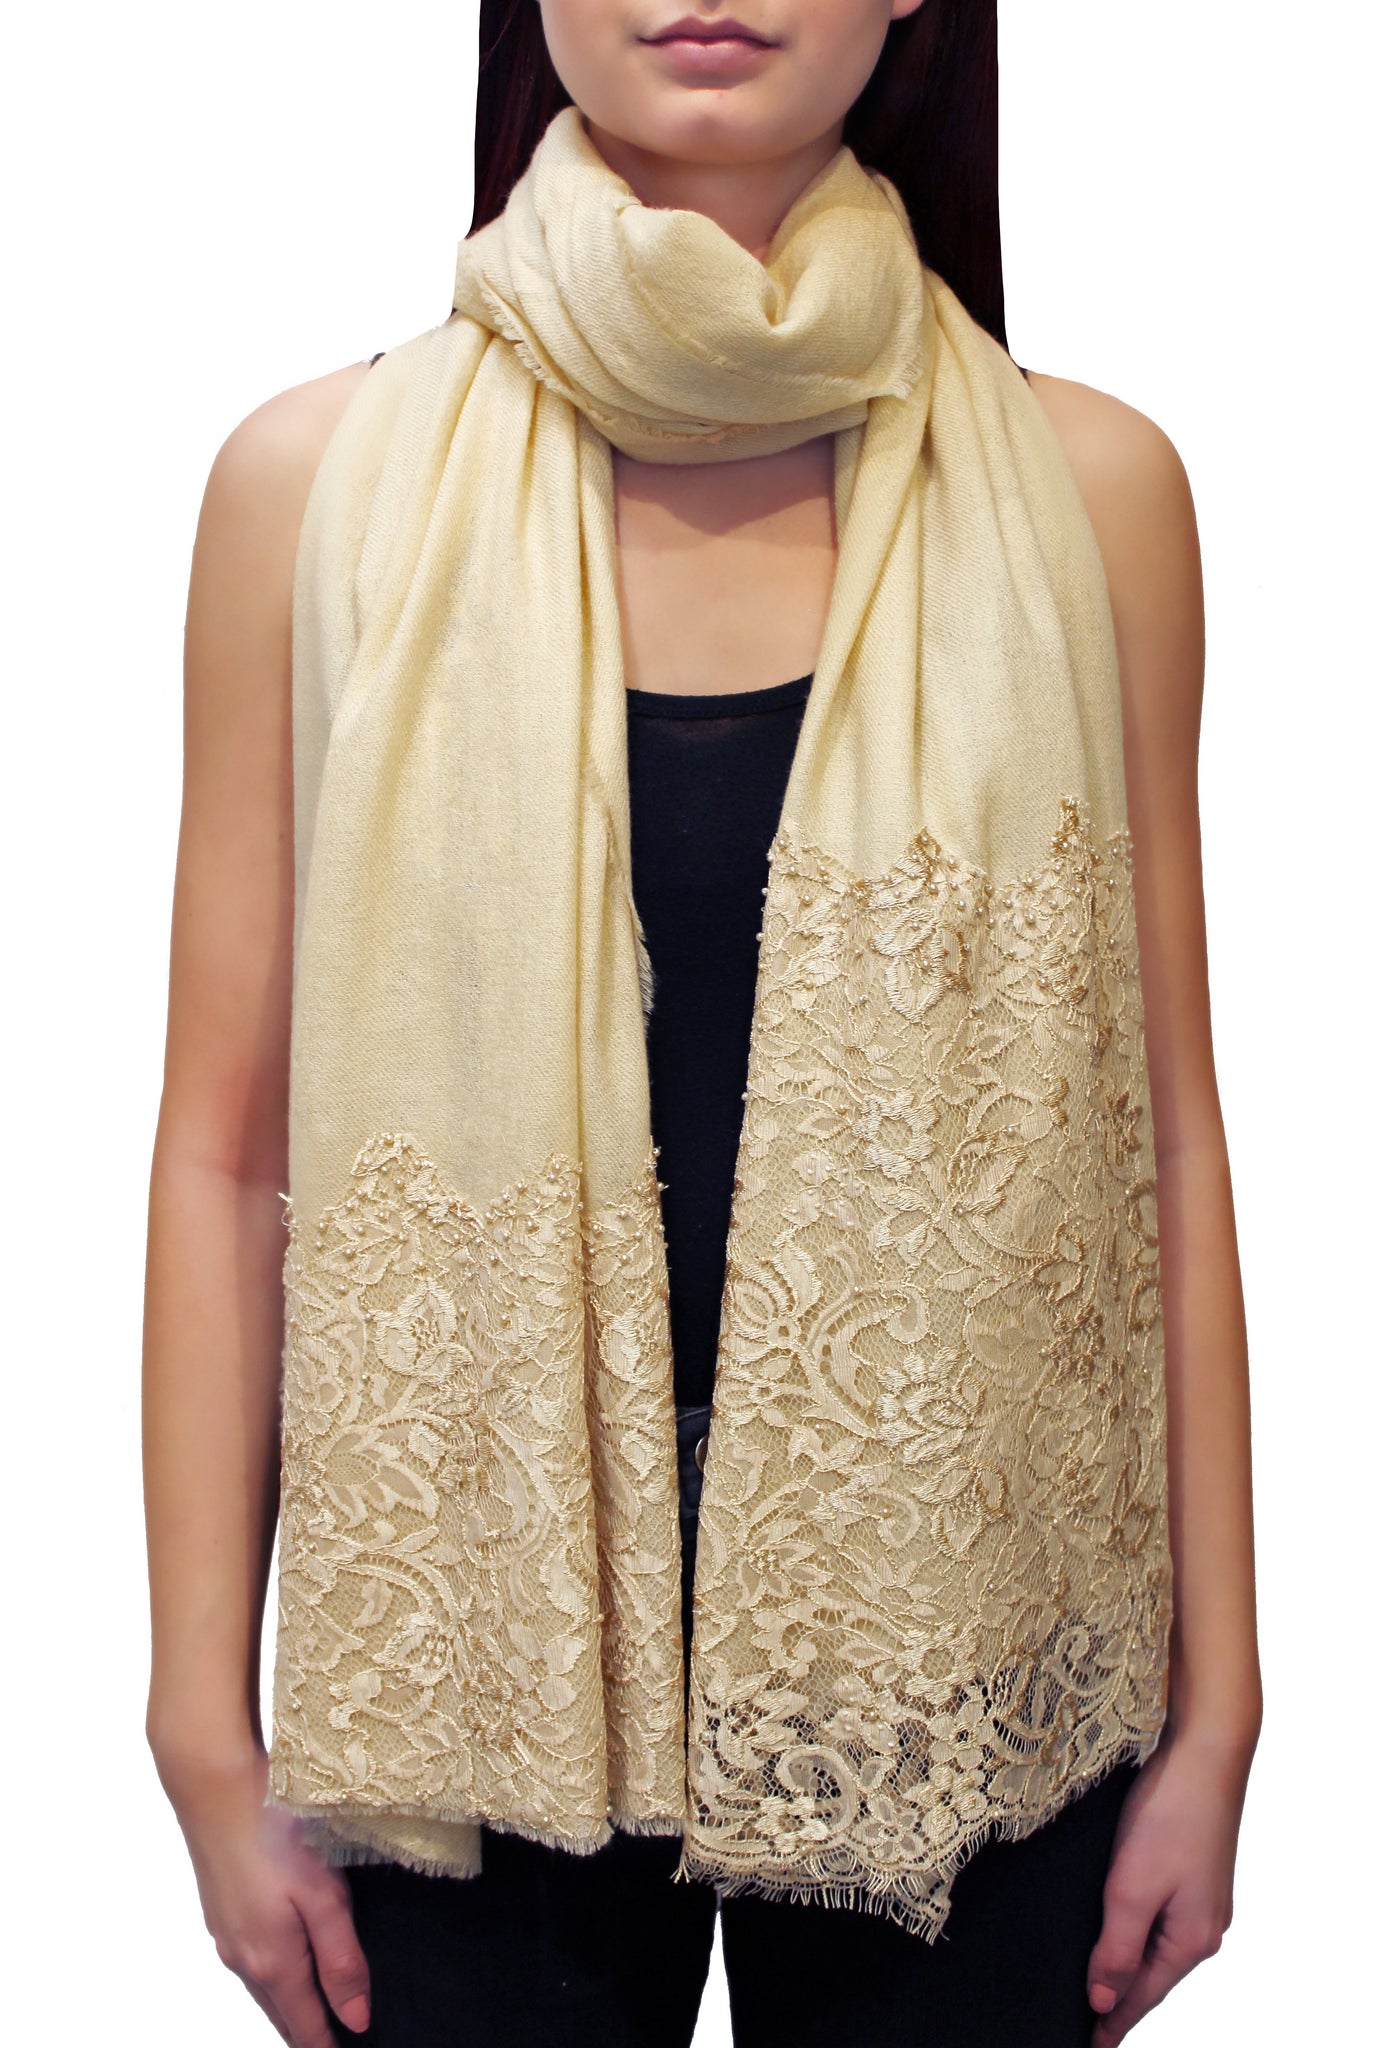 Cream beaded lace pashmina shawl front view